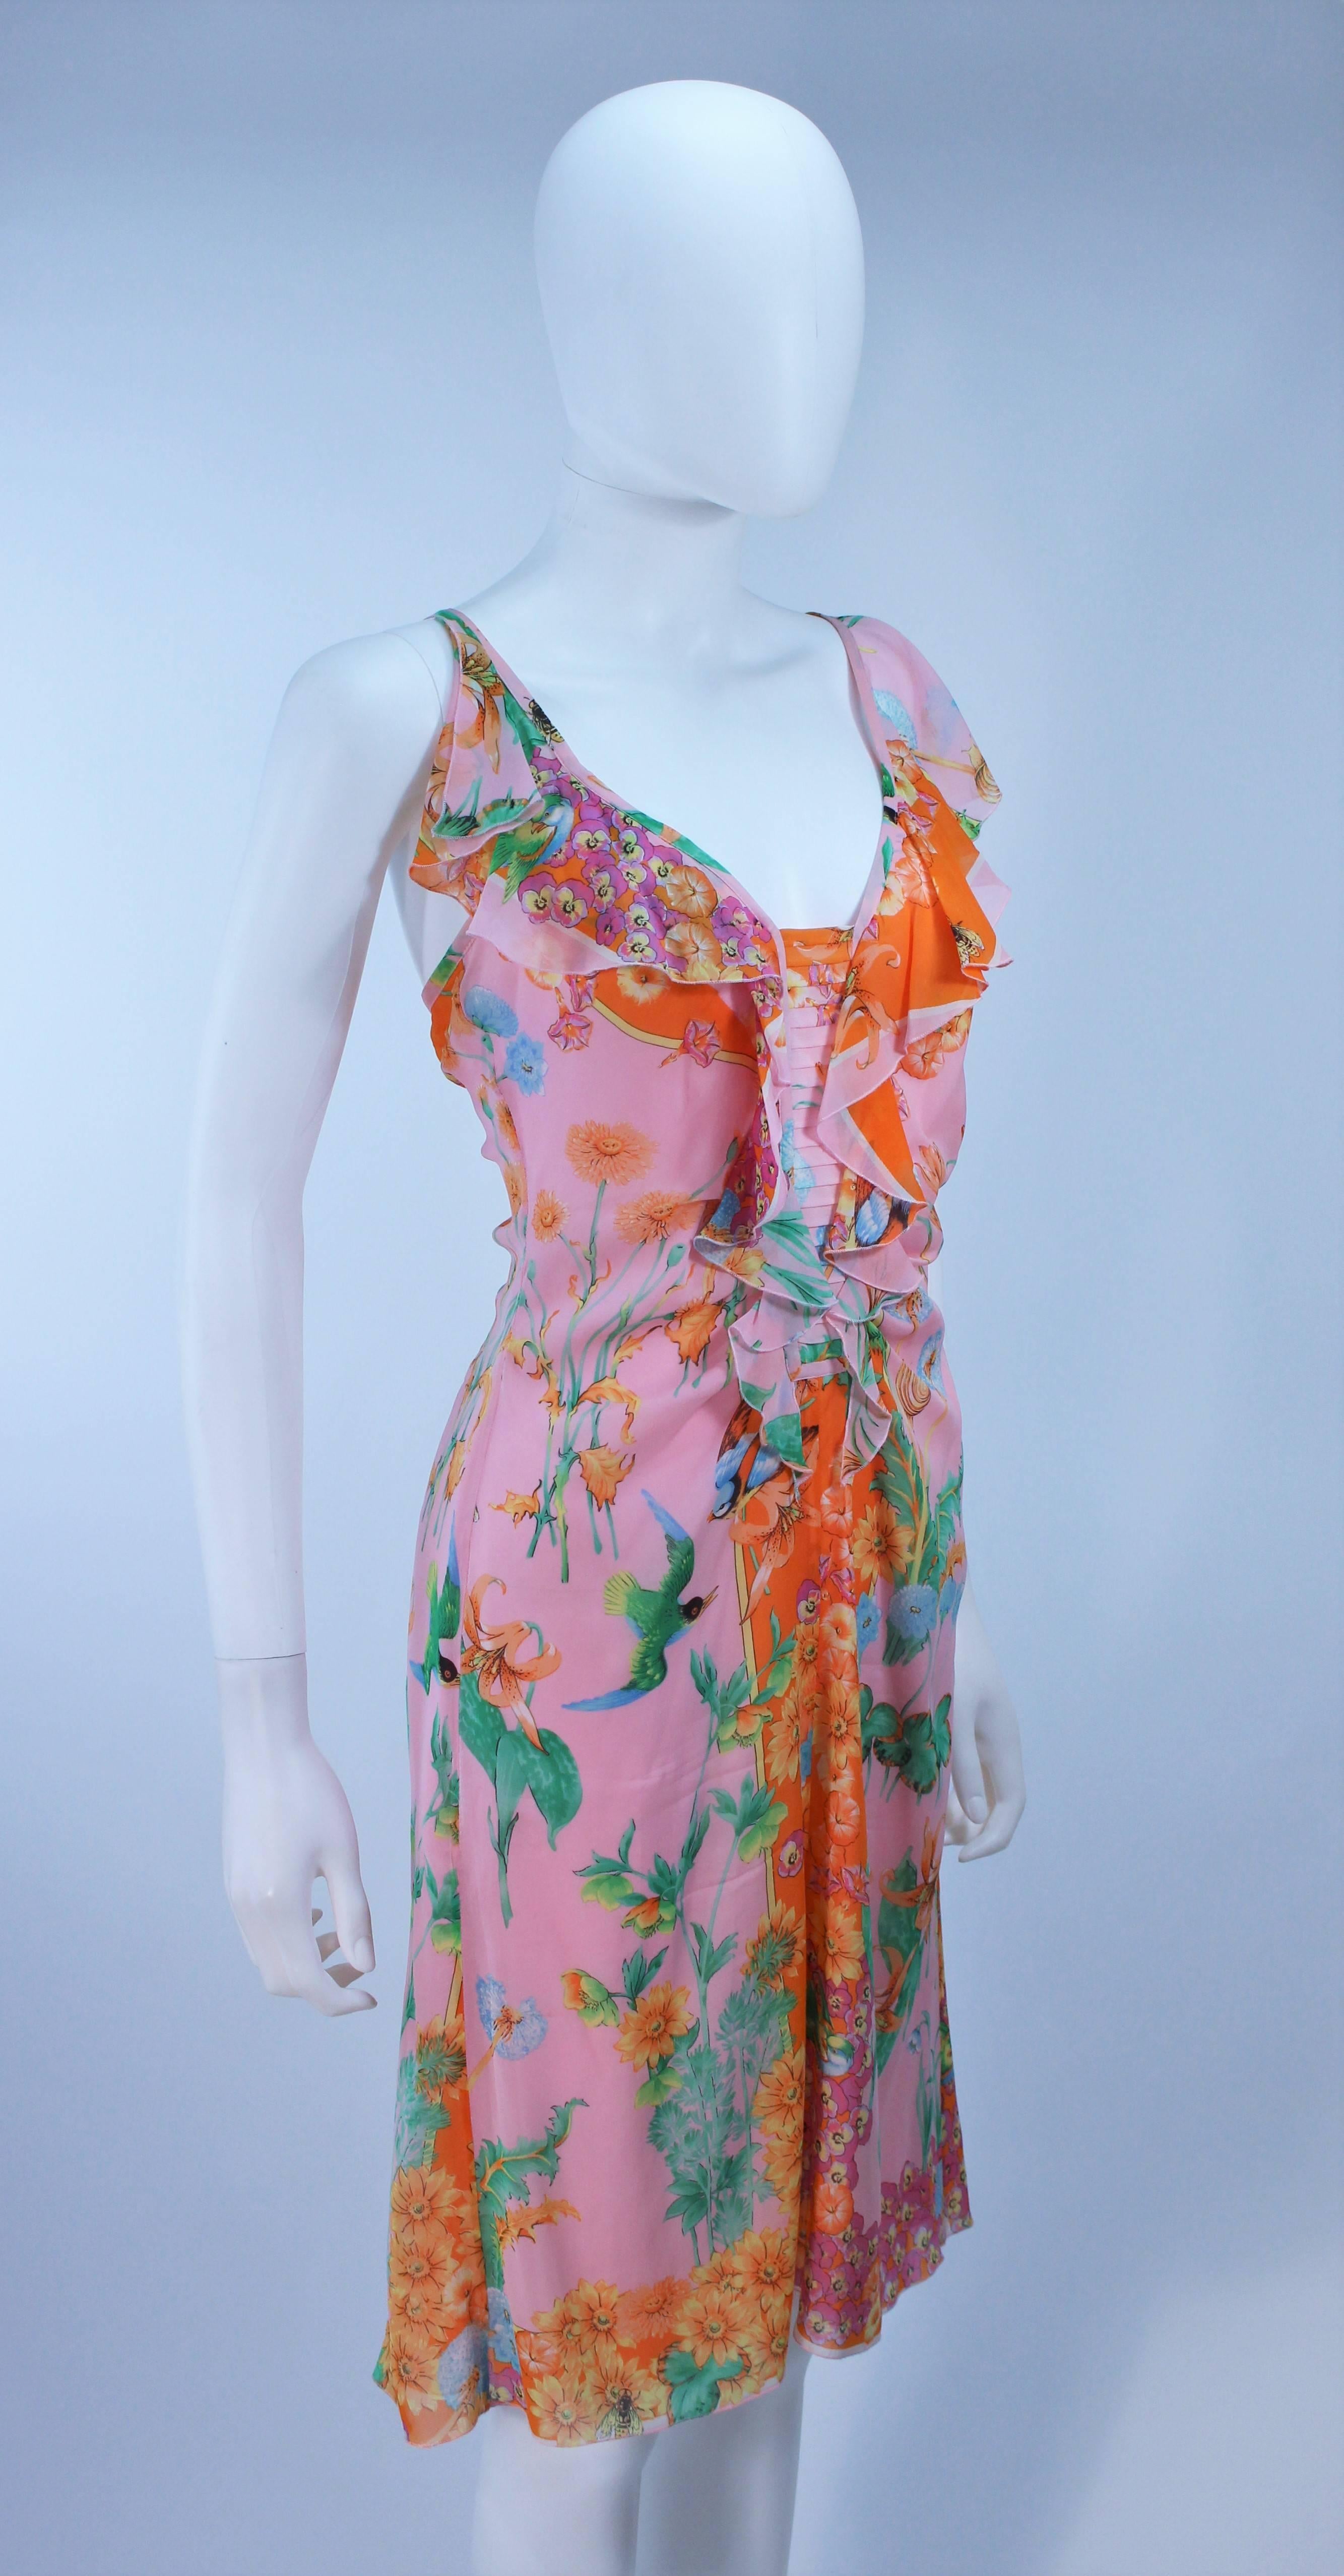 VERSACE Stretch Ruffled Silk Dress with Floral Print Size 42 1